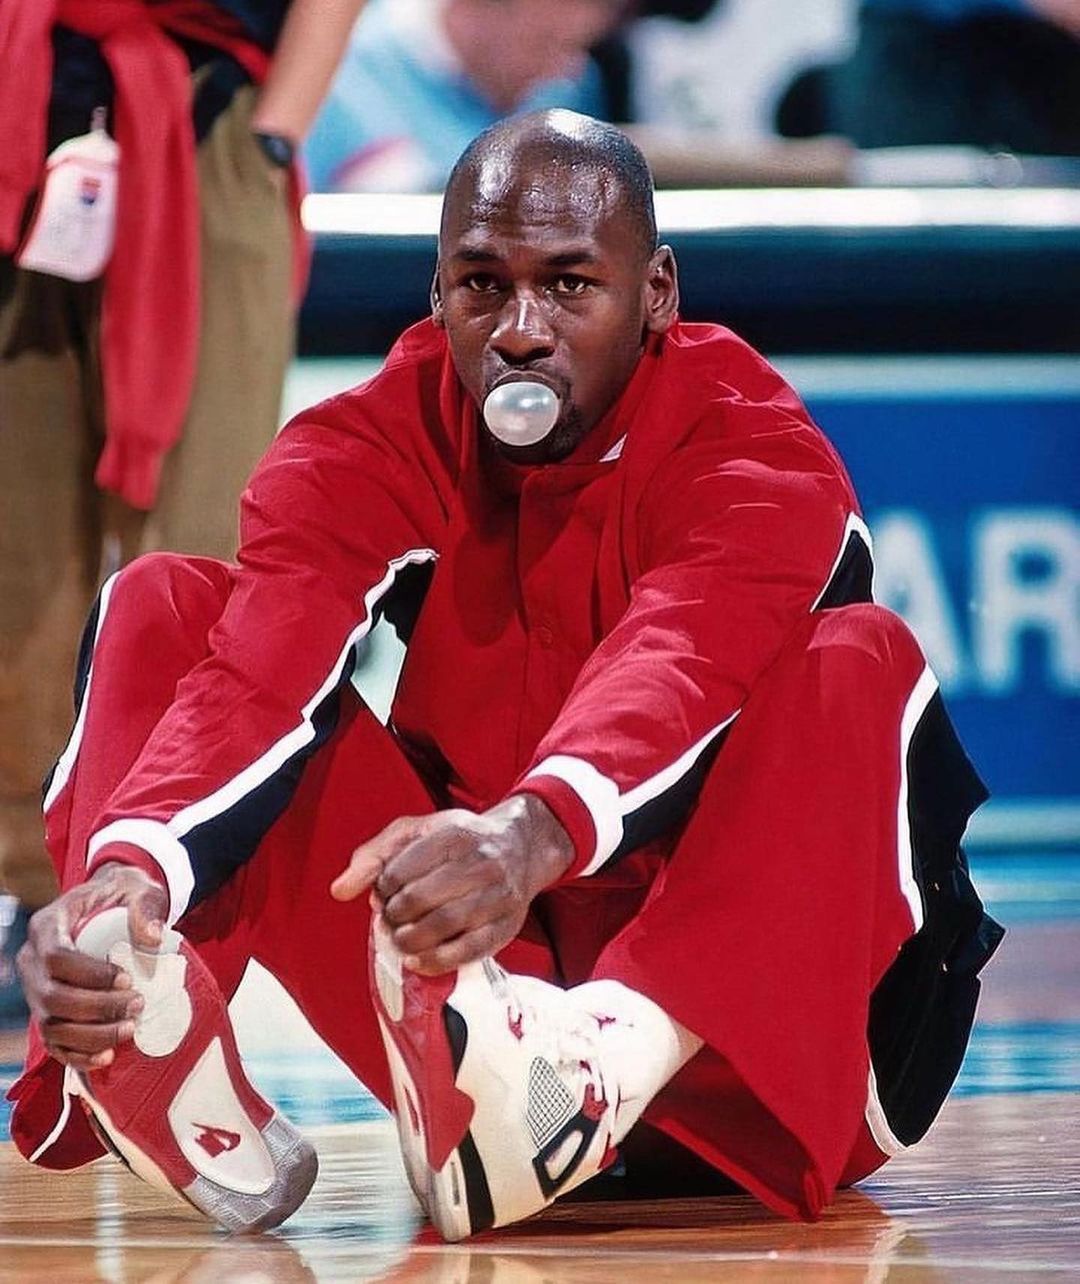 What is the difference between Jordans and Nike's Air Jordans? - Quora